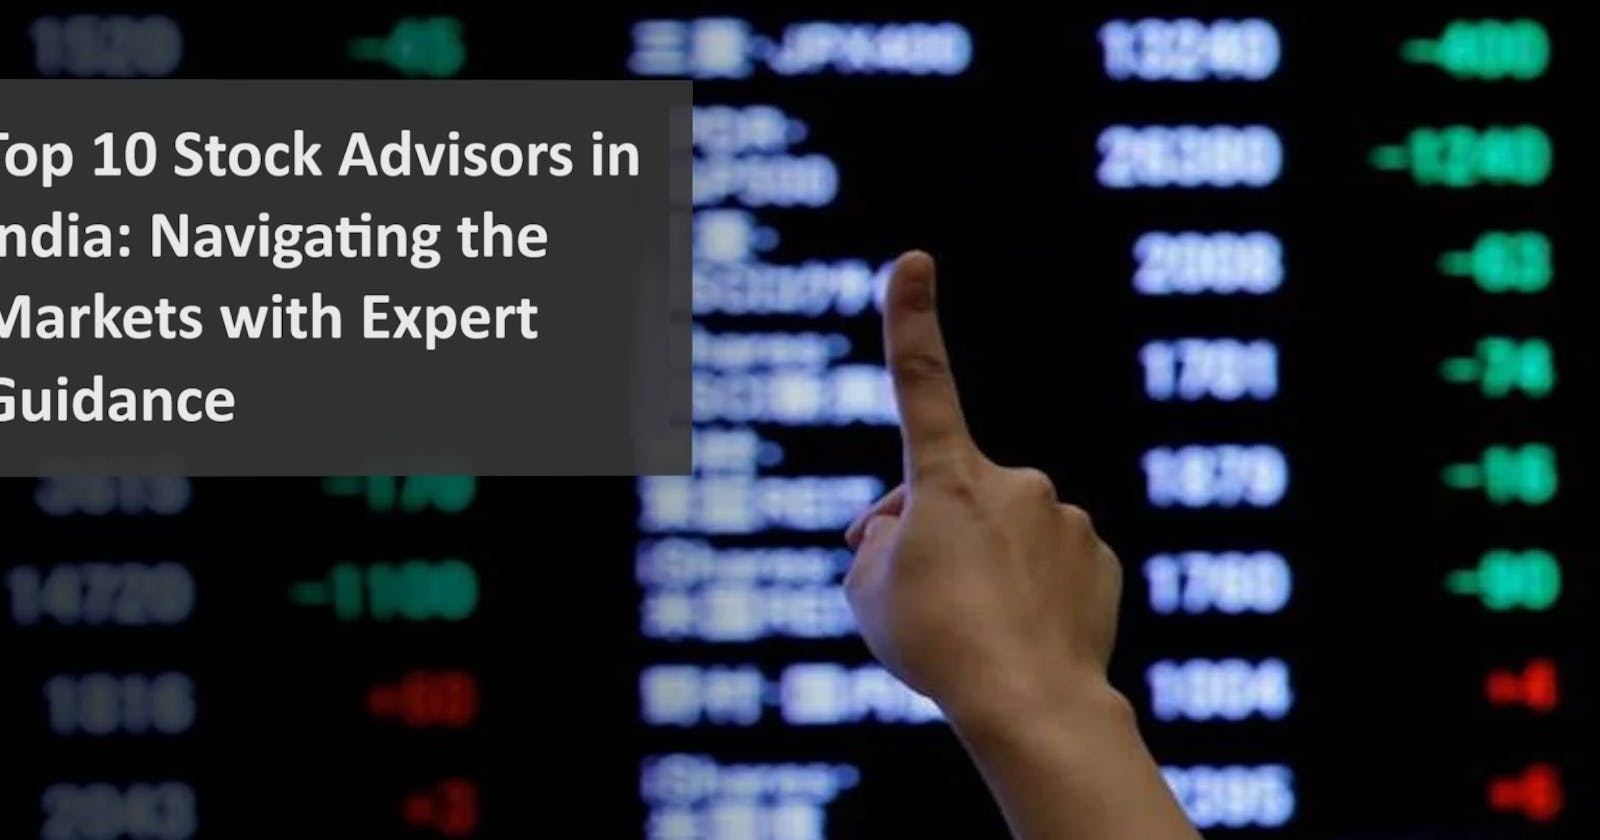 Top 10 Stock Advisors in India: Navigating the Markets with Expert Guidance